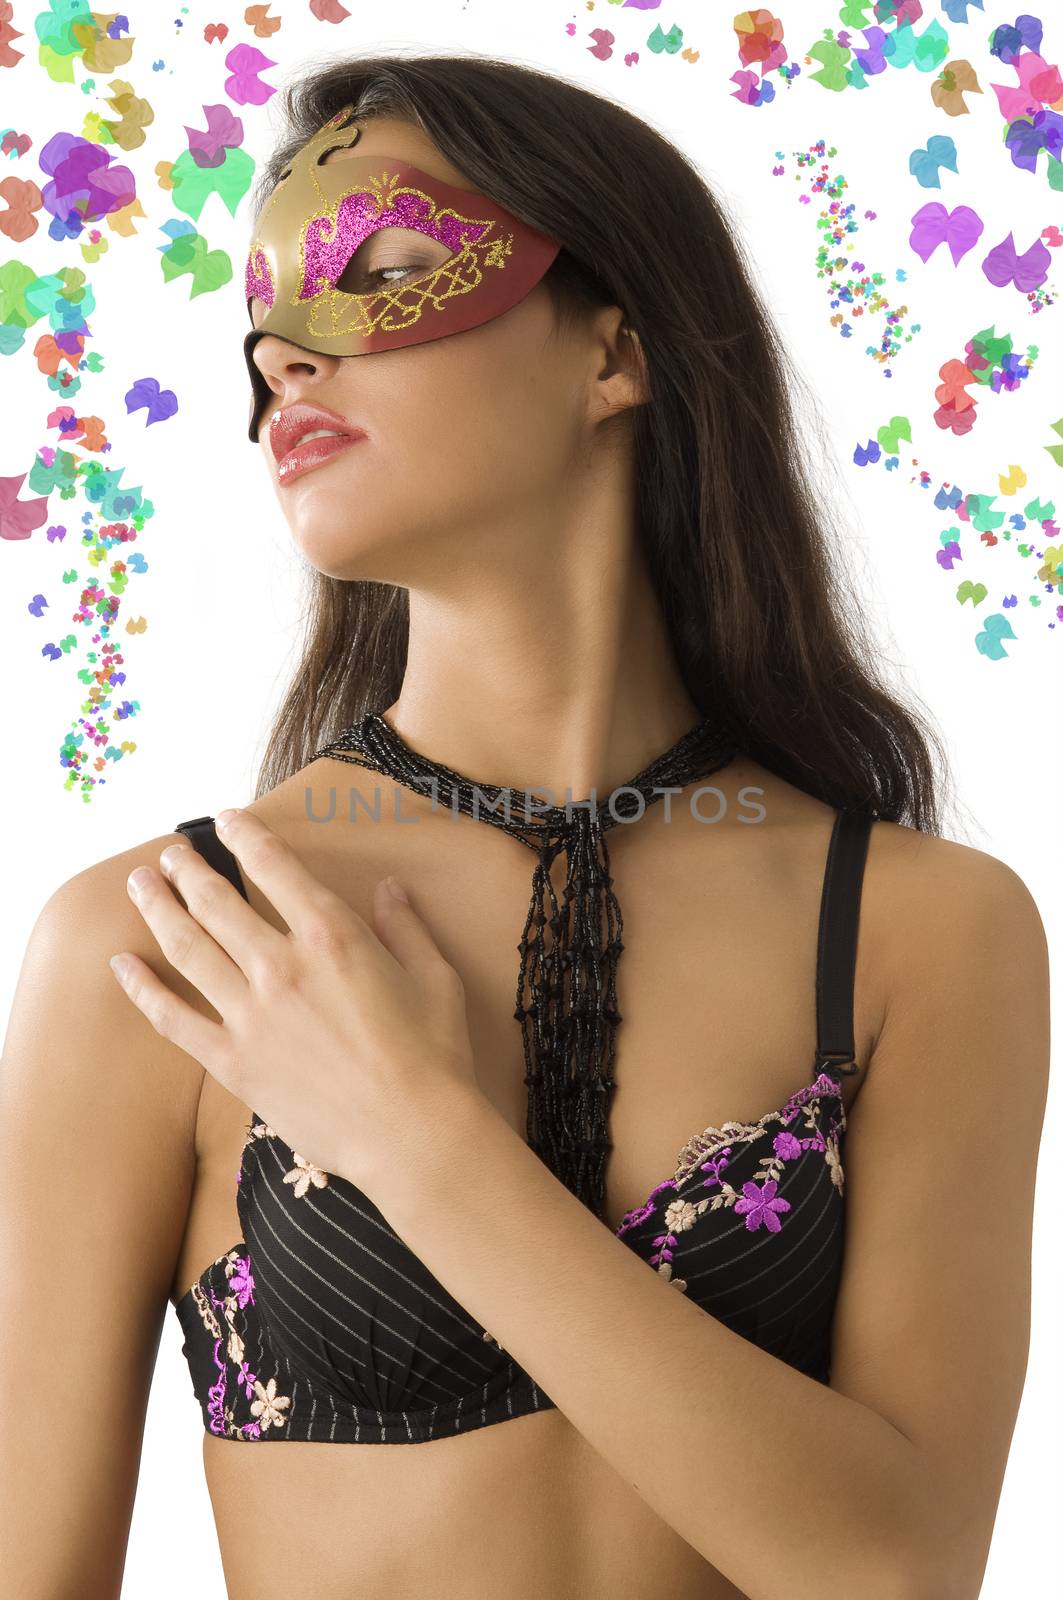 the bra and mask by fotoCD